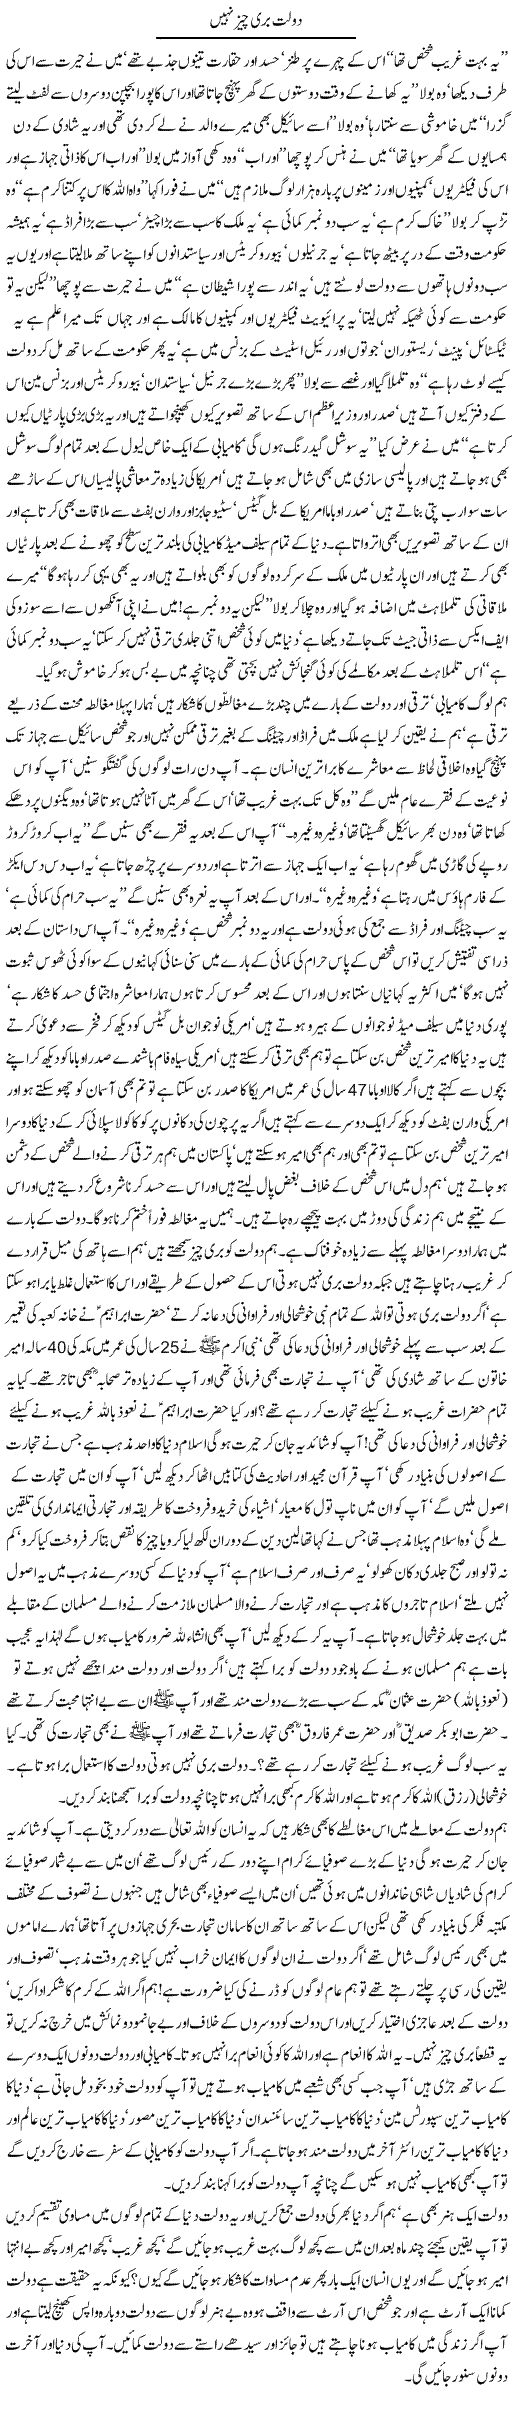 Wealth Is Not Bad Express Column Javed Chaudhry 7 August 2011